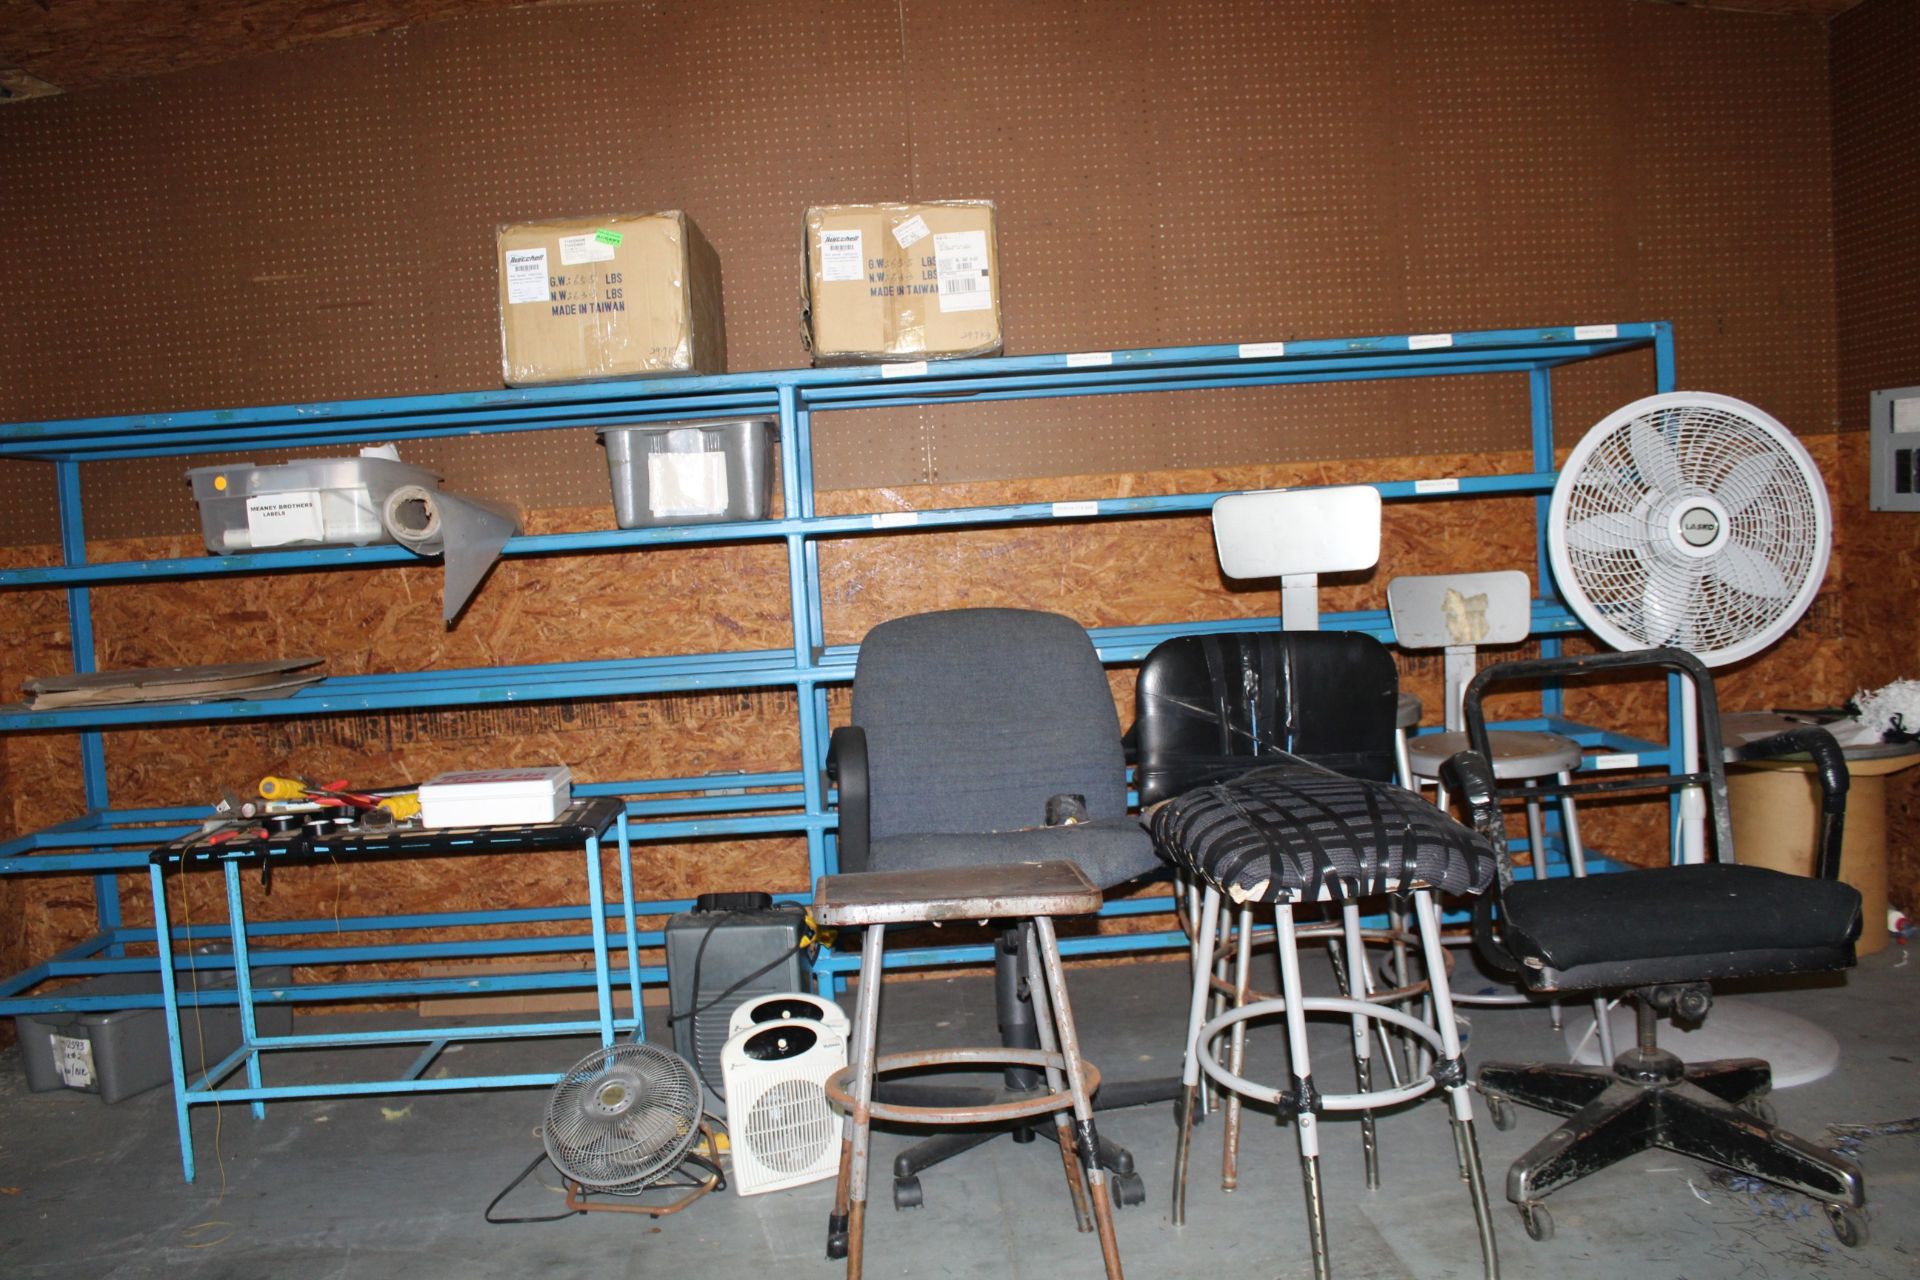 Thrifty Metal Sided 10 x 16 Storage Building w/ Contents, (6) Chairs, Fan, (3) Electric Heaters, (2) - Image 4 of 5